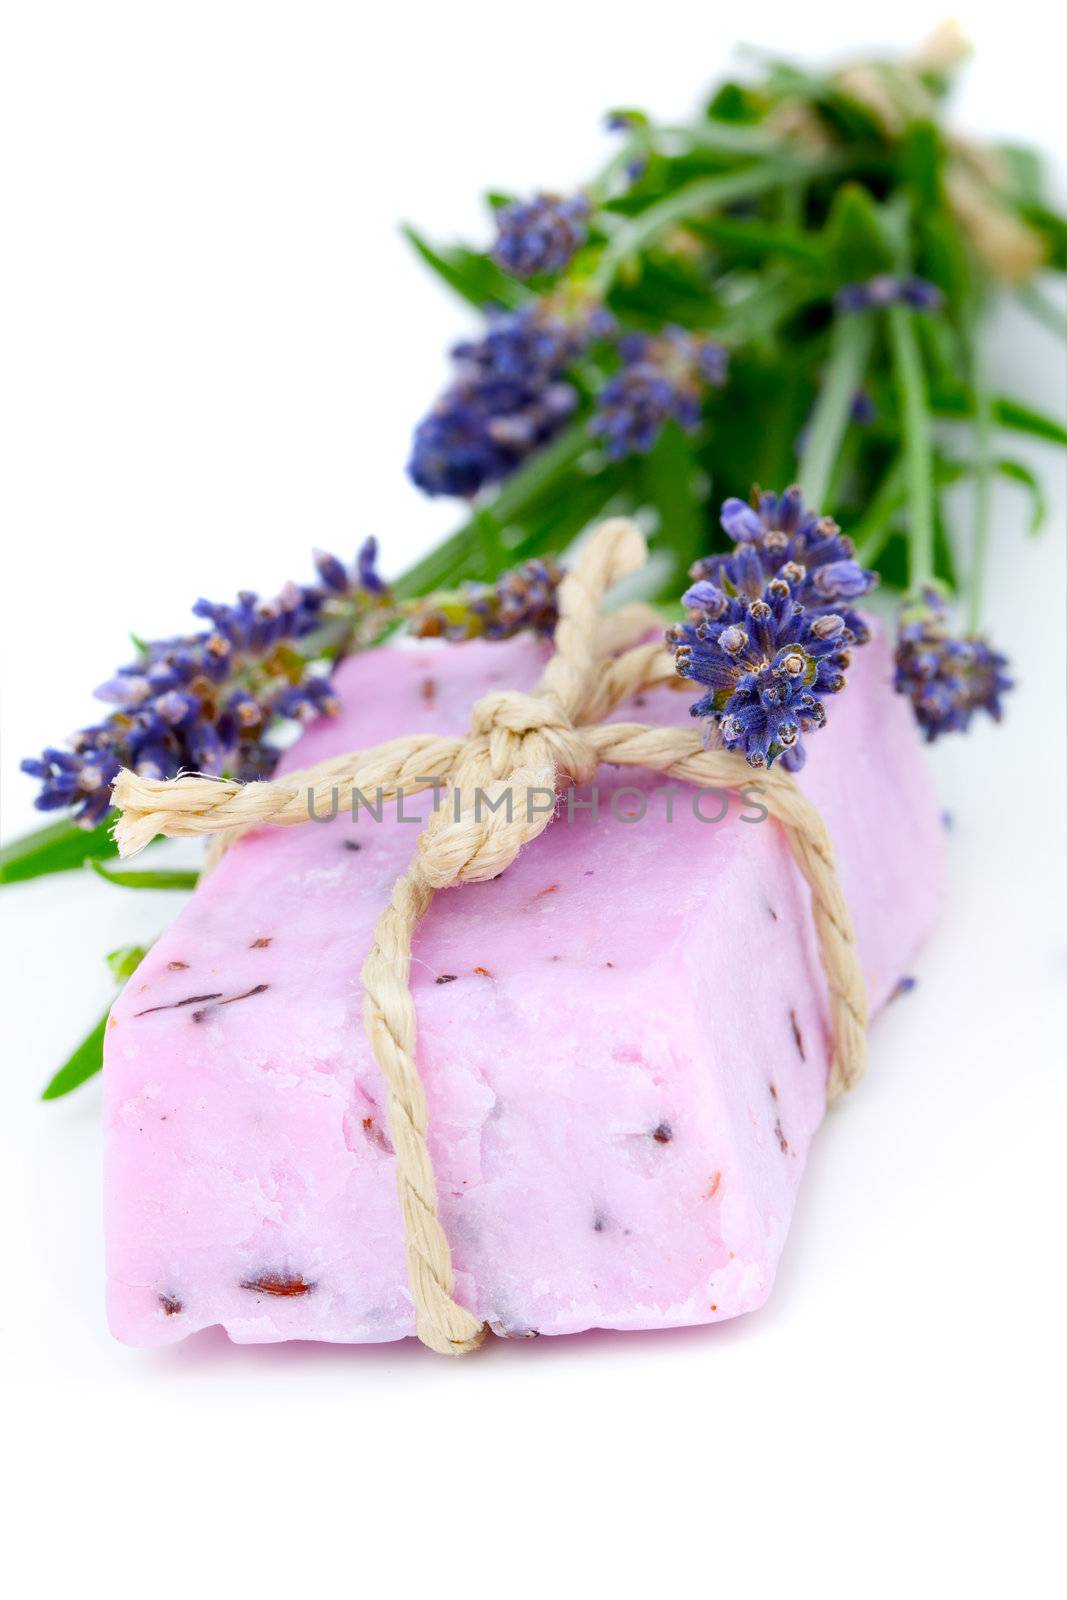 Lavender soap and lavender flower, isolated on white background by motorolka